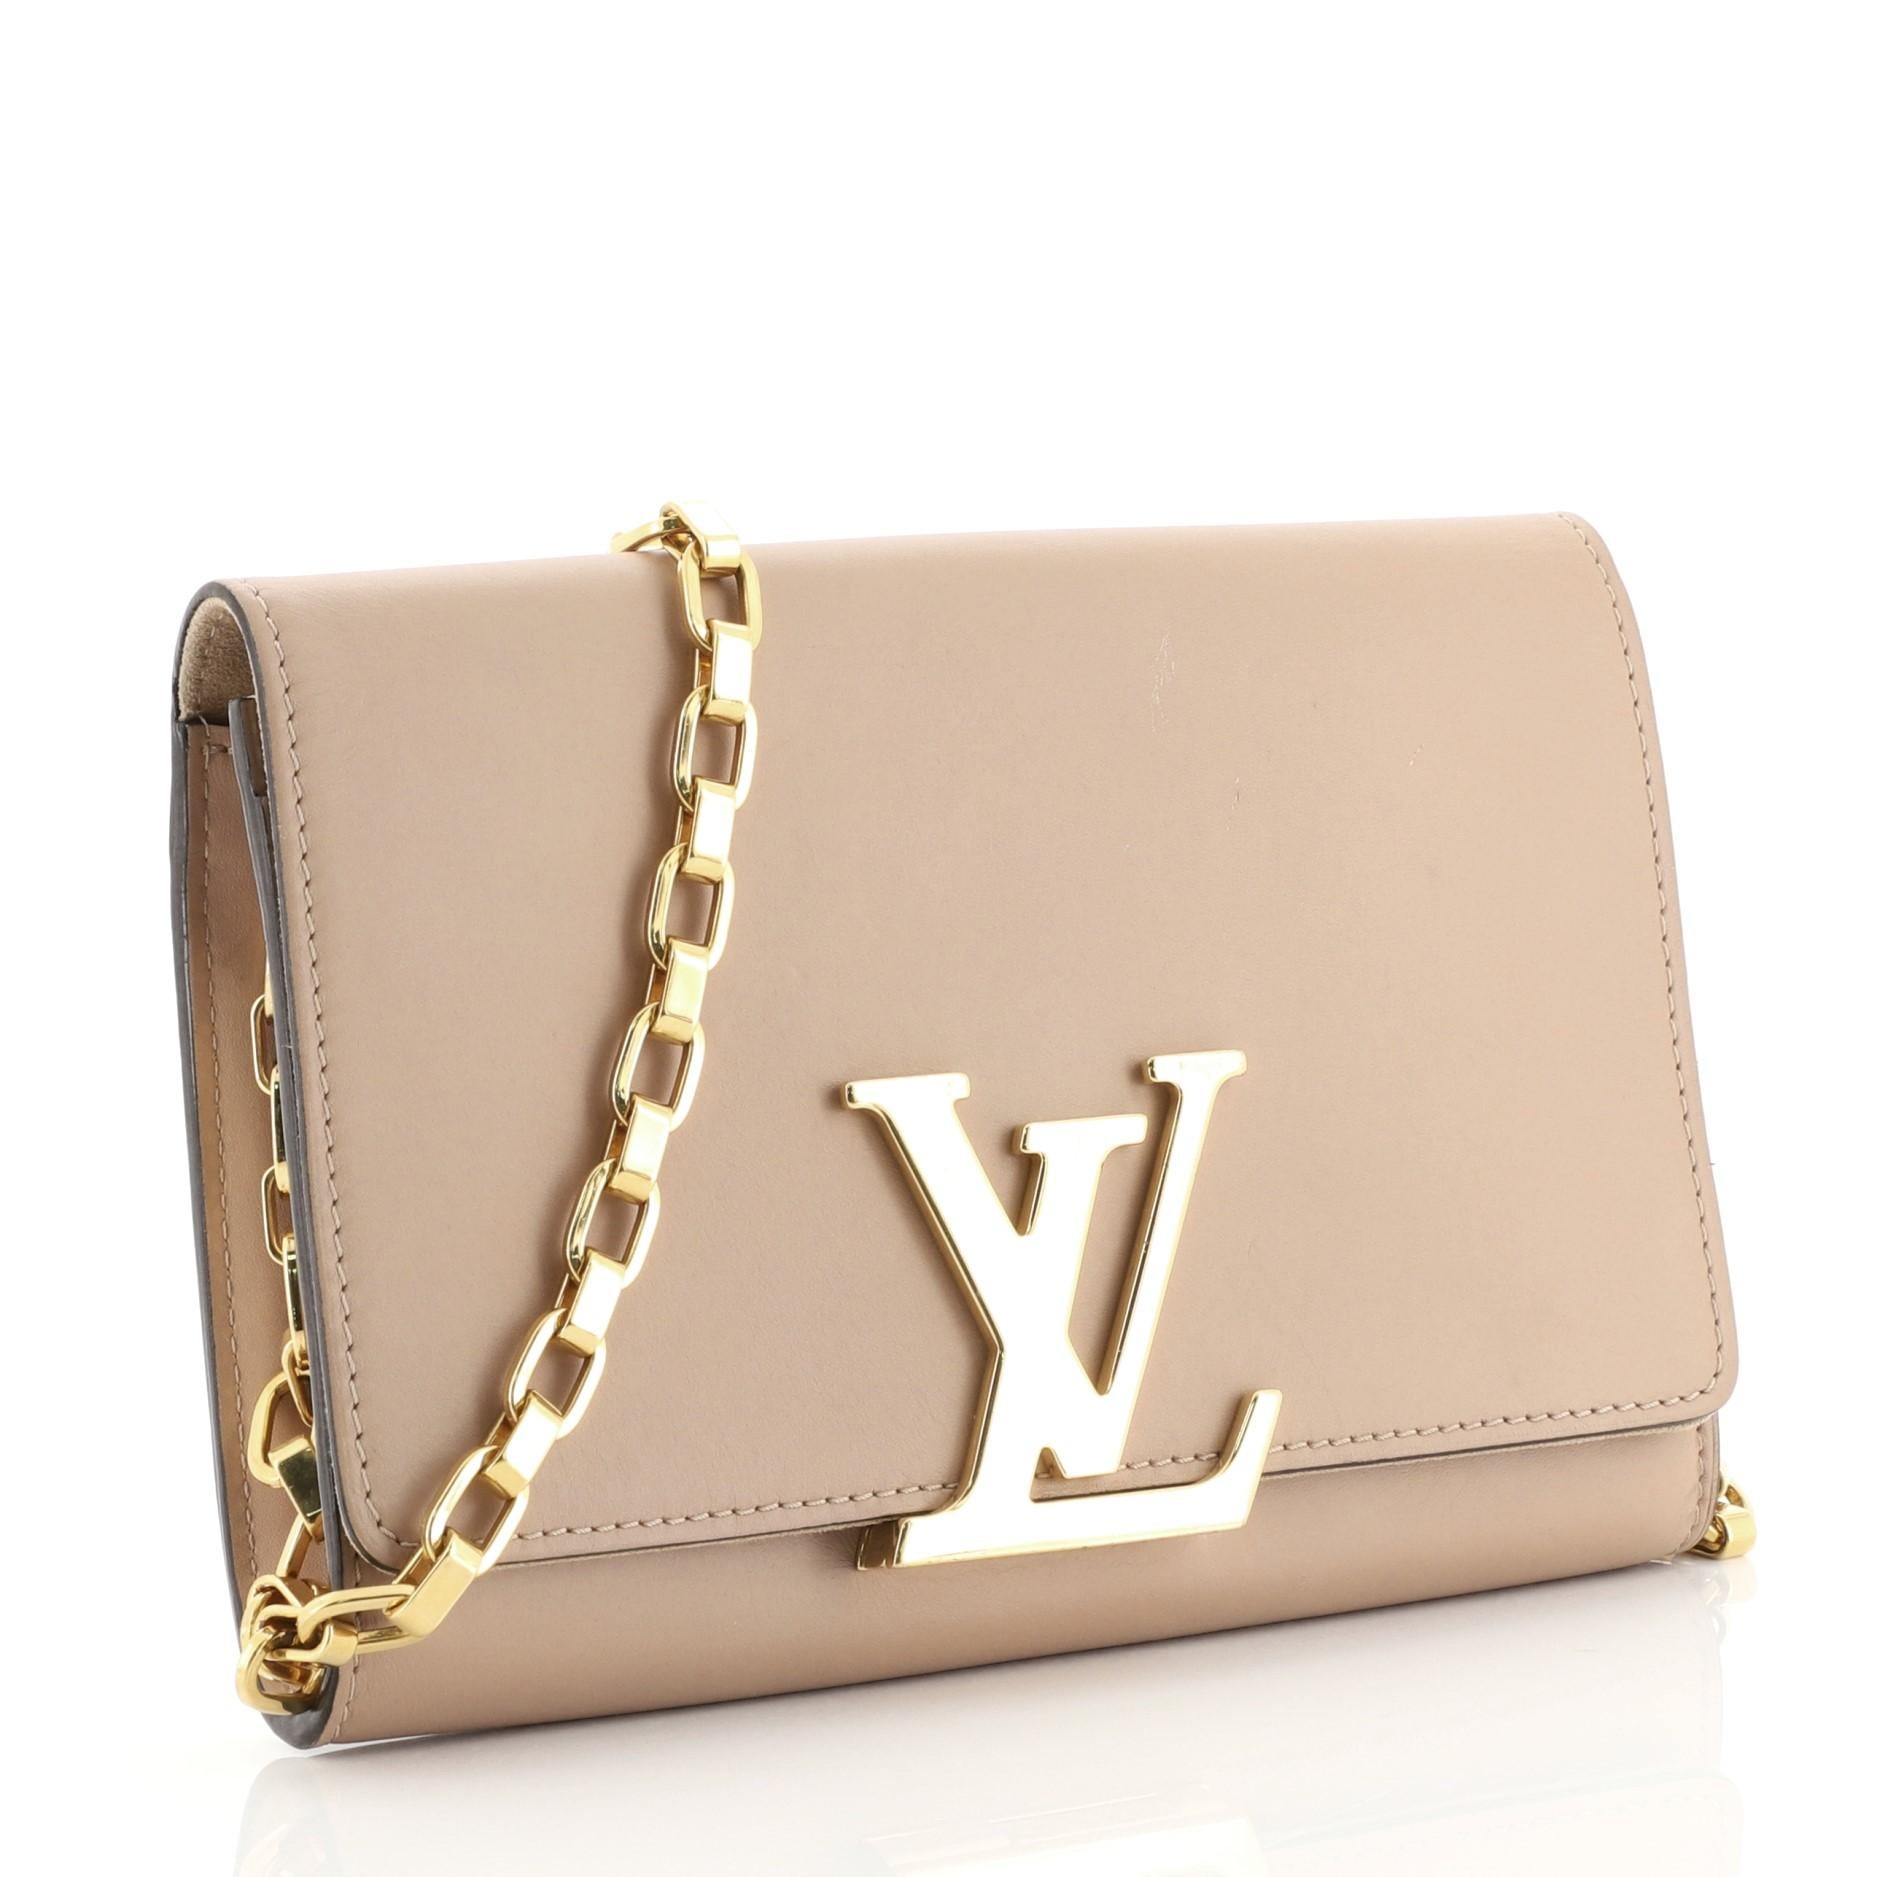 This Louis Vuitton Chain Louise Clutch Leather GM, crafted in neutral leather, features an oversized LV logo flip lock clasp closure, chain link strap and gold-tone hardware. Its flap opens to a neutral microfiber and leather interior with zip